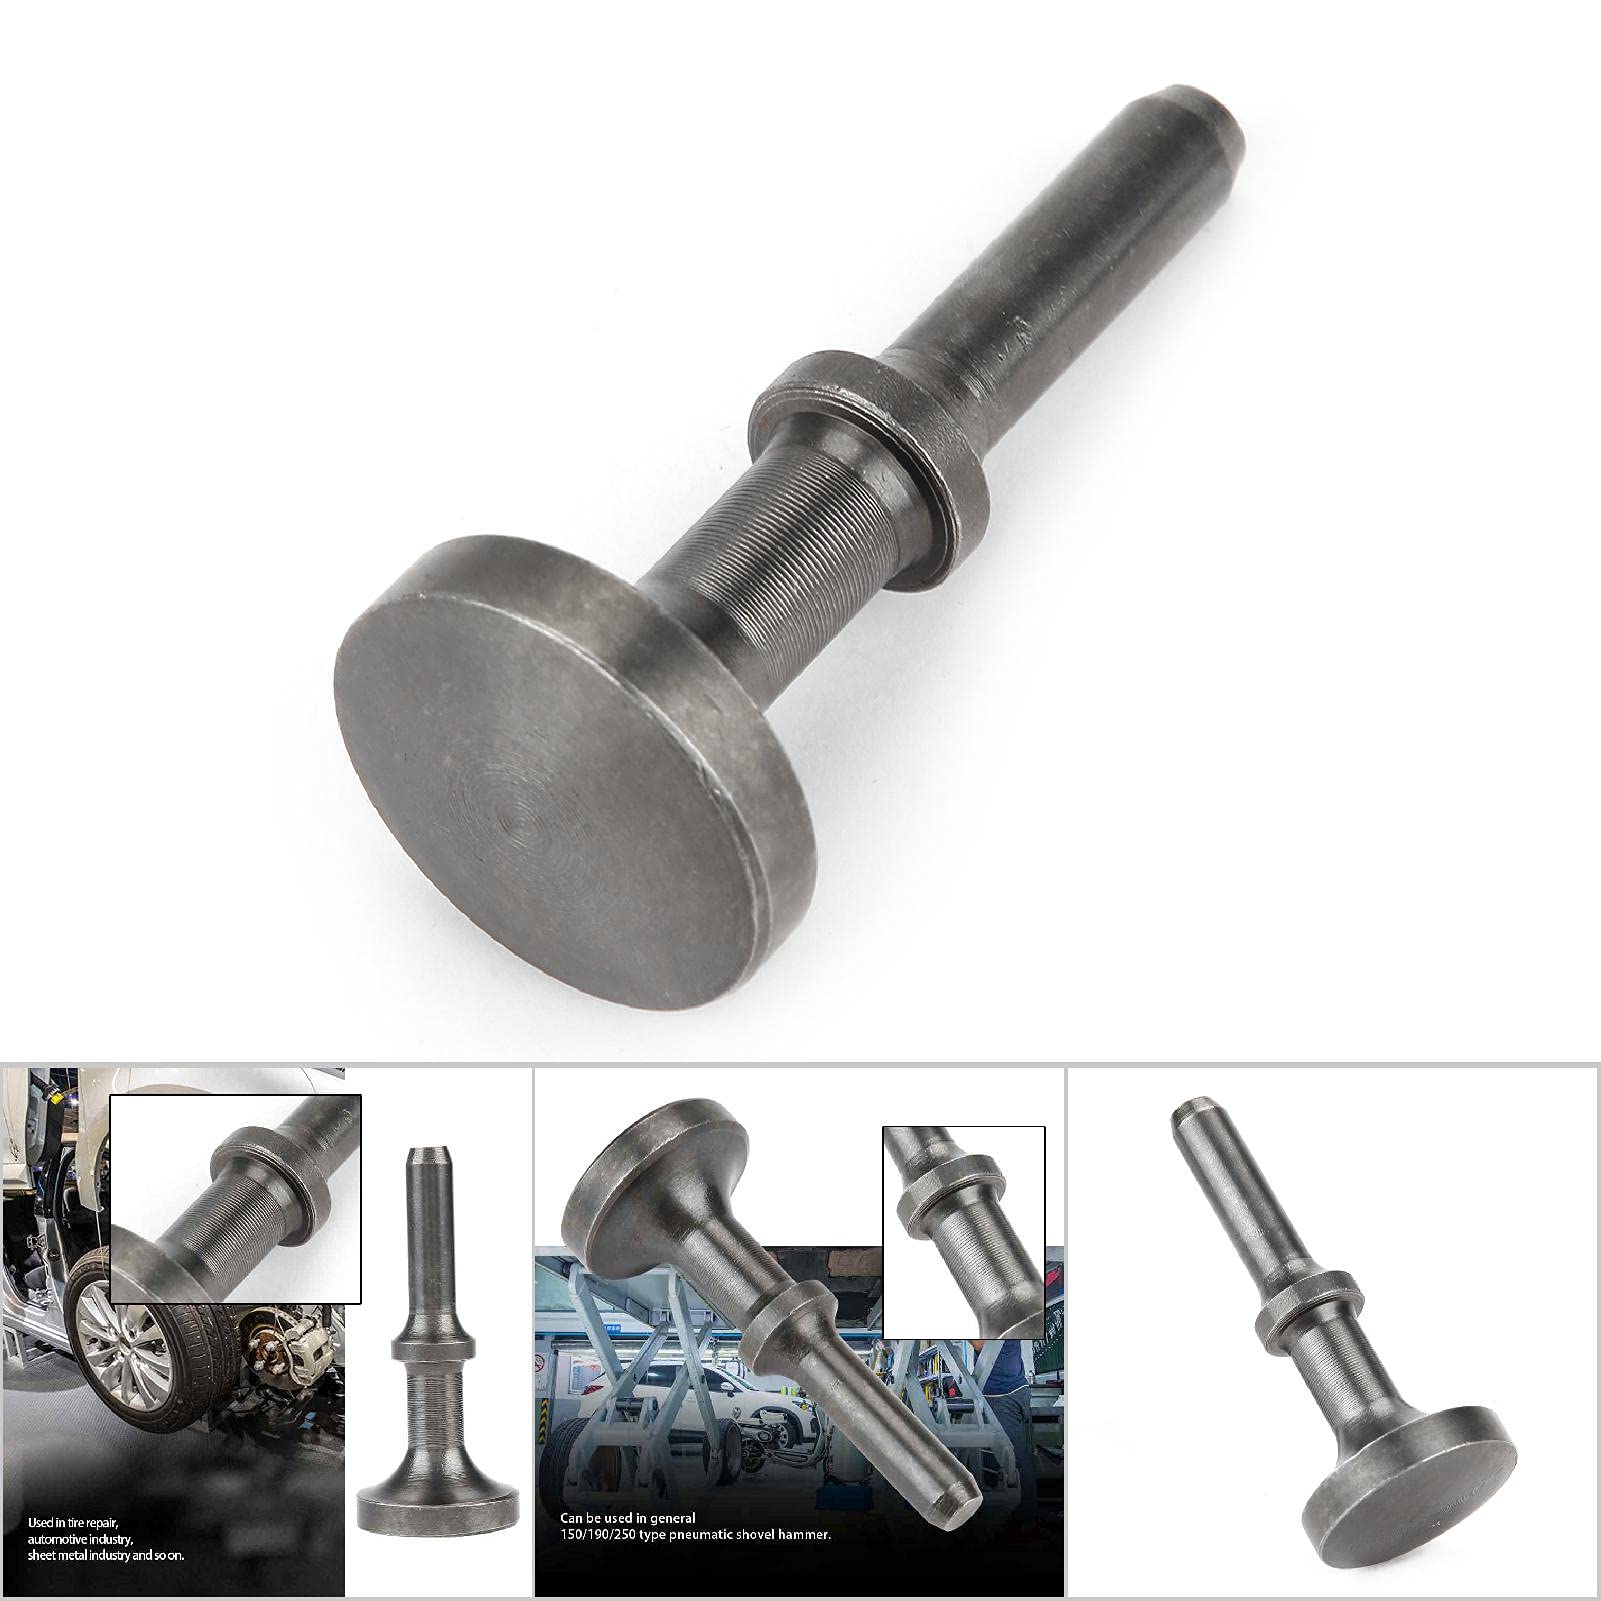 Eujgoov Pneumatic Air Hammer Bit, air Hammer bits air Chisel bits Chrome Molybdenum Steel Extended Length Impact Tool for Automotive Industry Sheet Metal Industry(178mm)(80mm/3.1in)